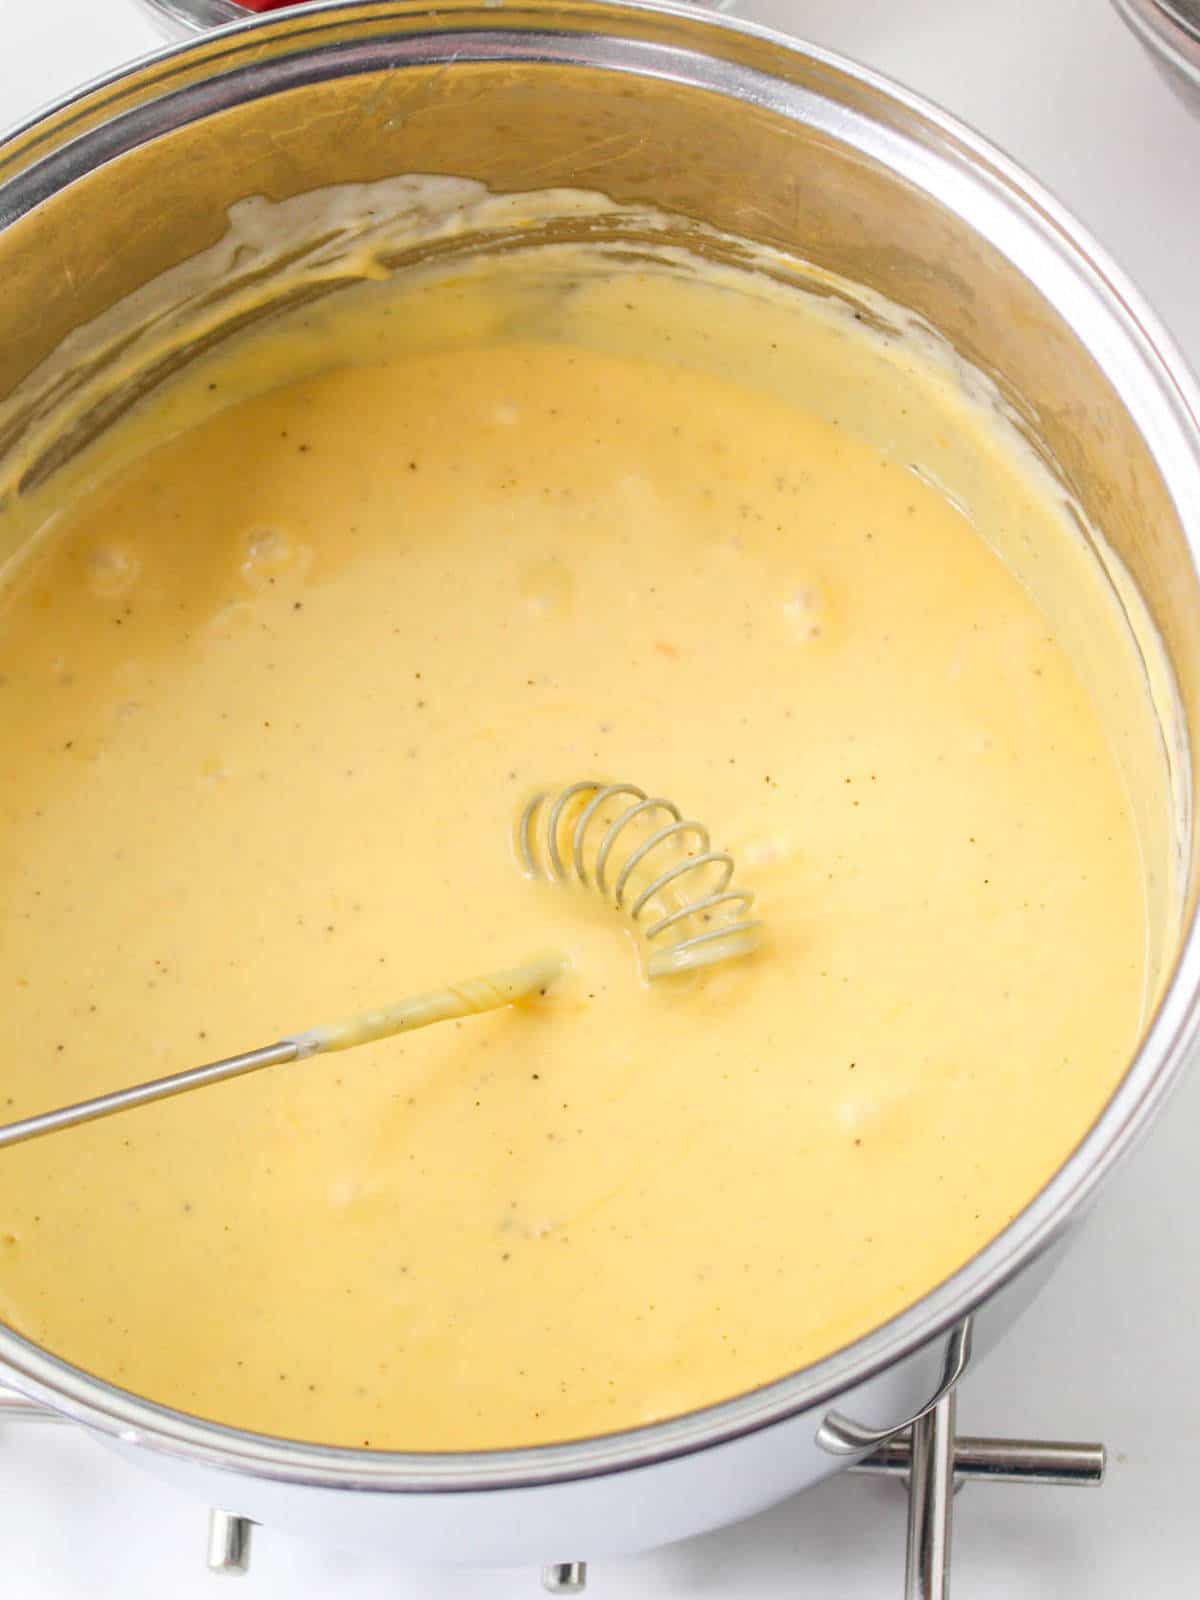 cheese melted into roux to form a thick cheese sauce.